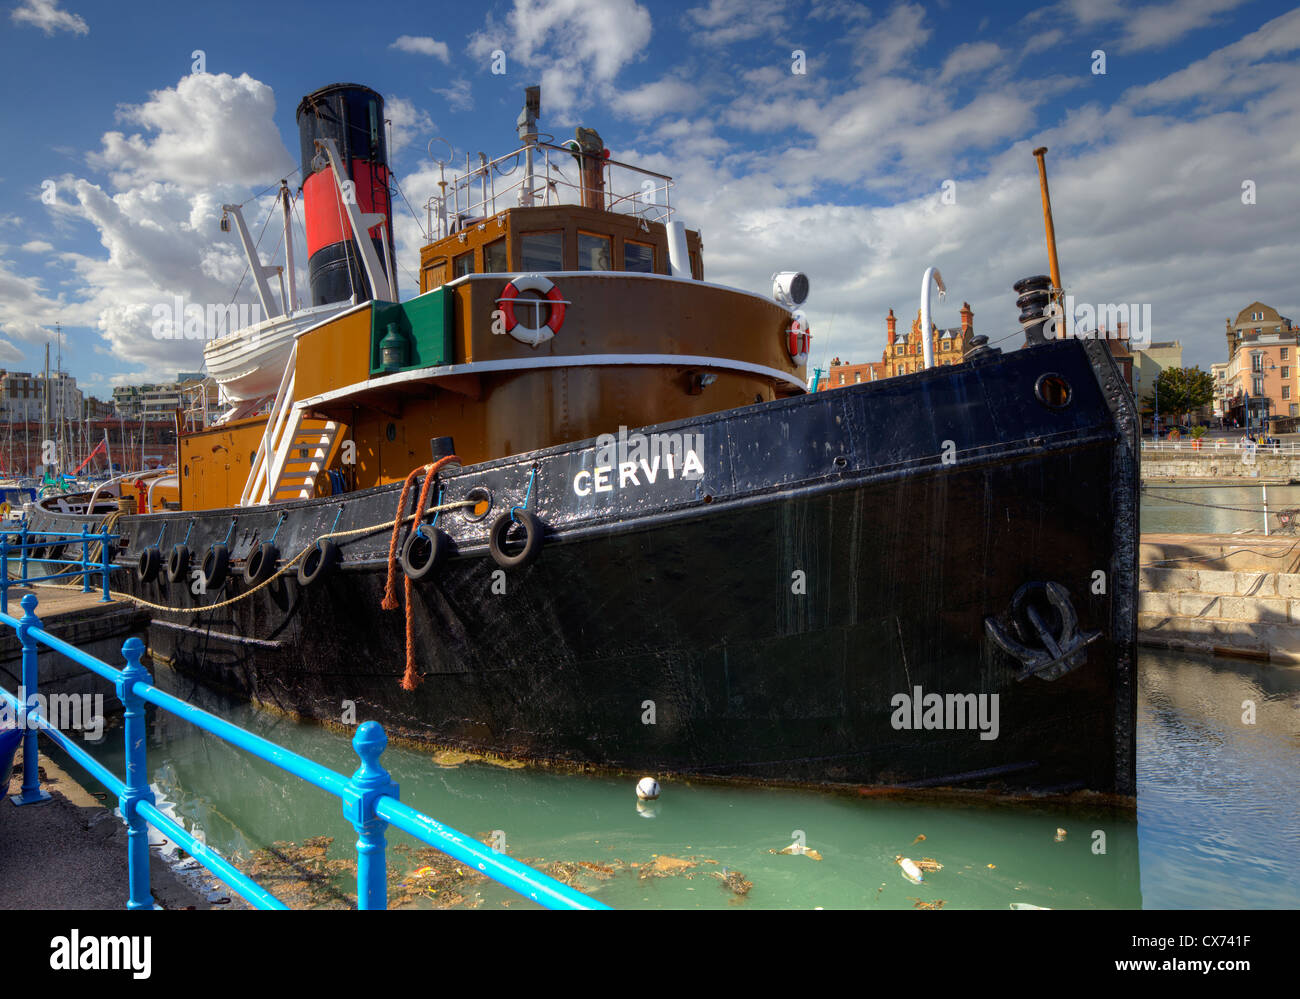 The Steam Tug Cervia in Ramsgate Harbour. Stock Photo